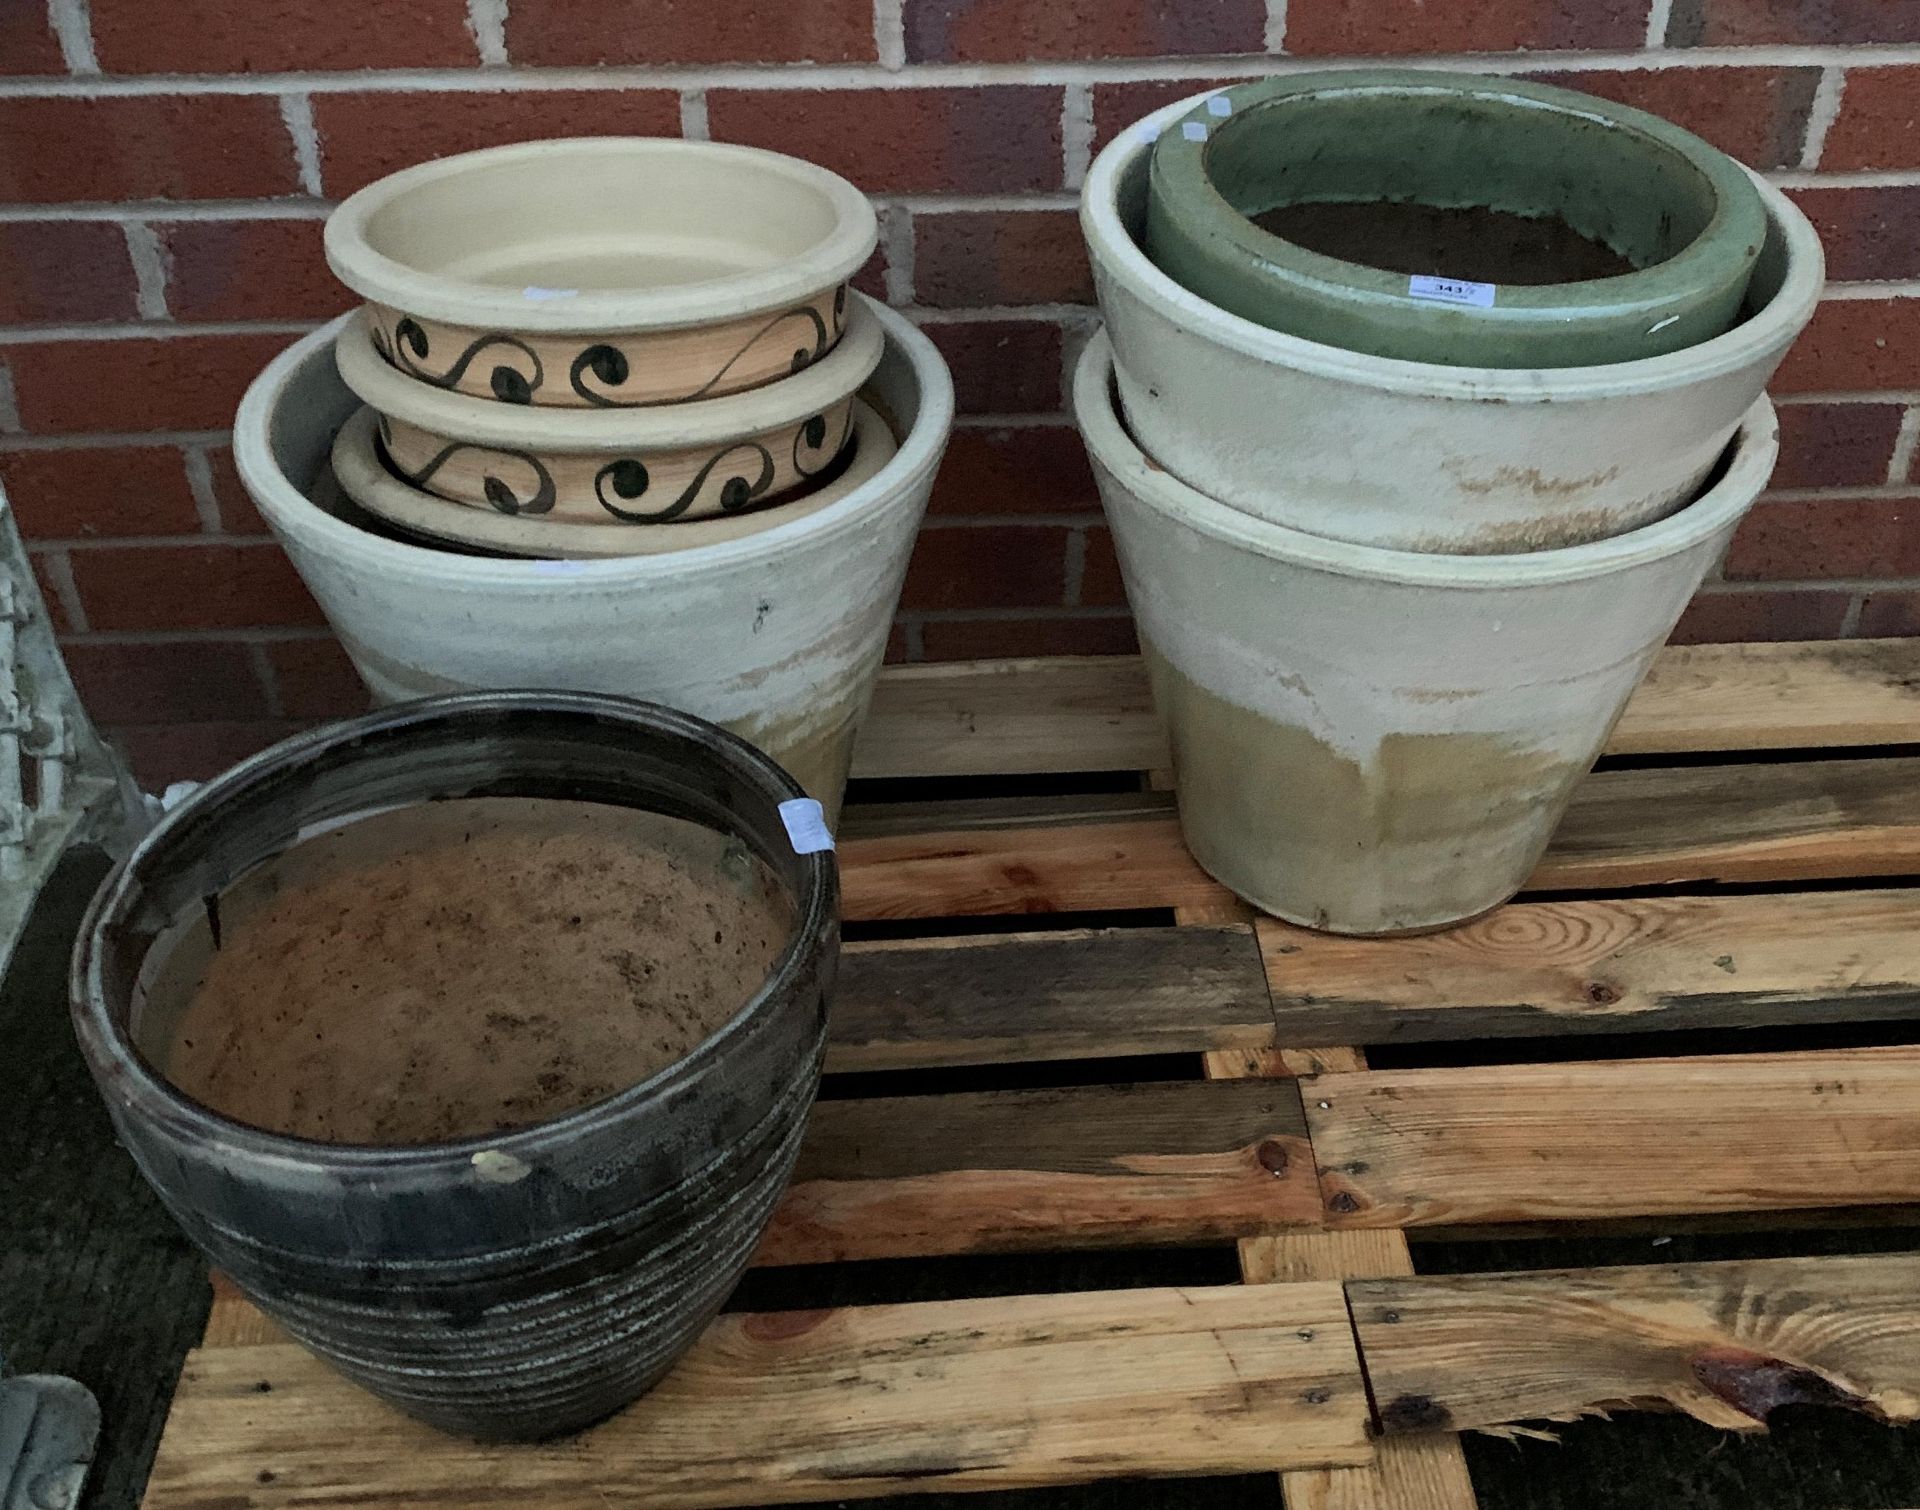 Contents to pallet - 8 glazed assorted sized pottery planters